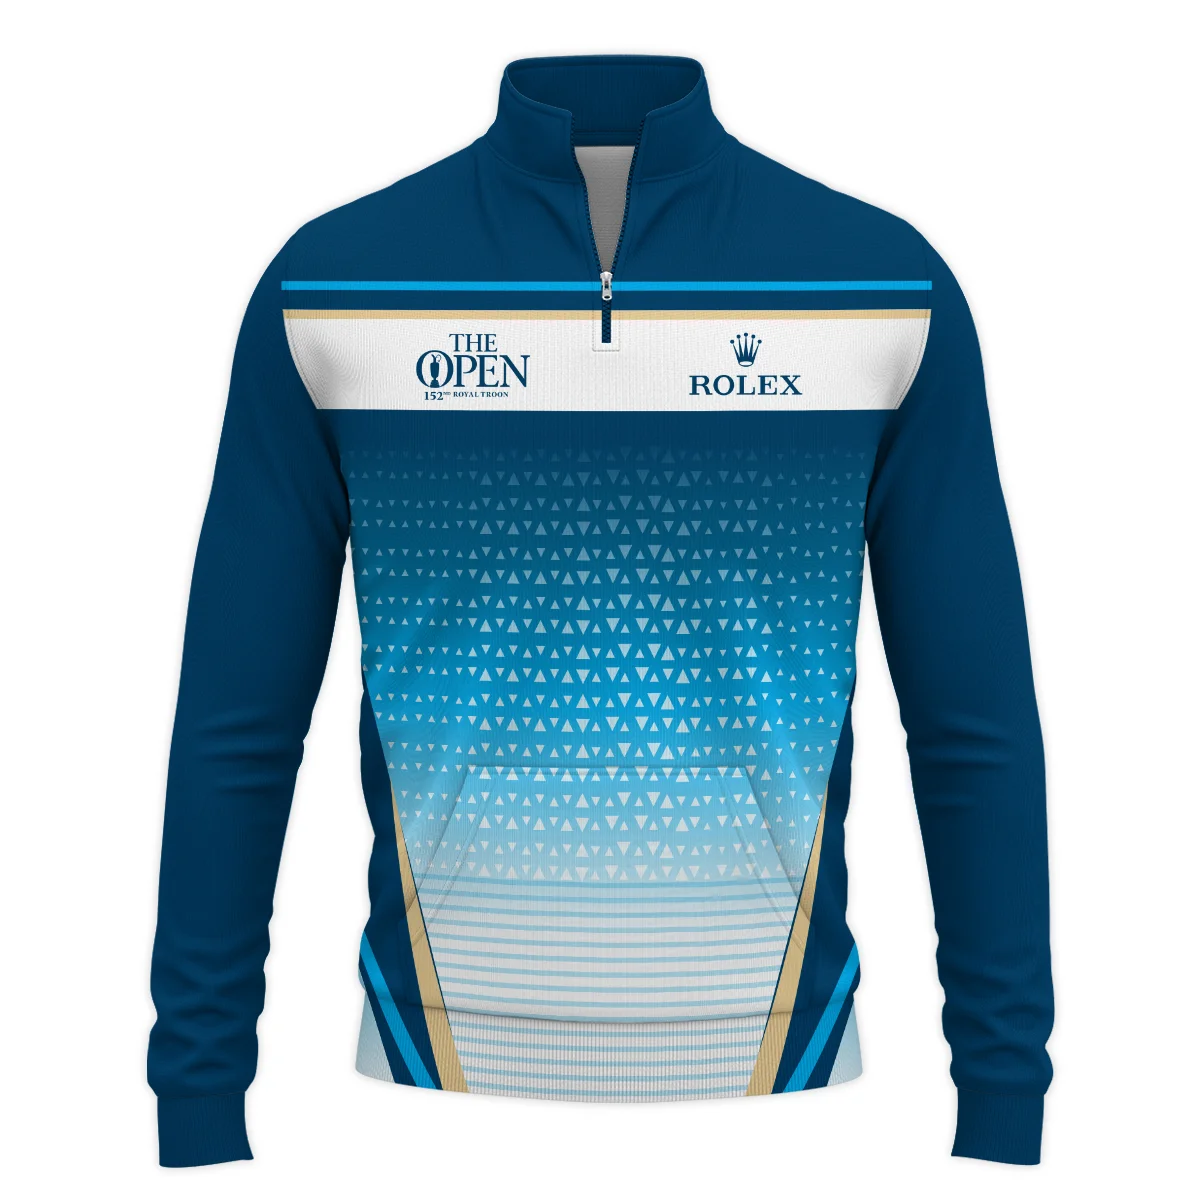 152nd The Open Championship Golf Blue Yellow White Pattern Background Rolex Quarter-Zip Jacket All Over Prints HOTOP250624A01ROXSWZ